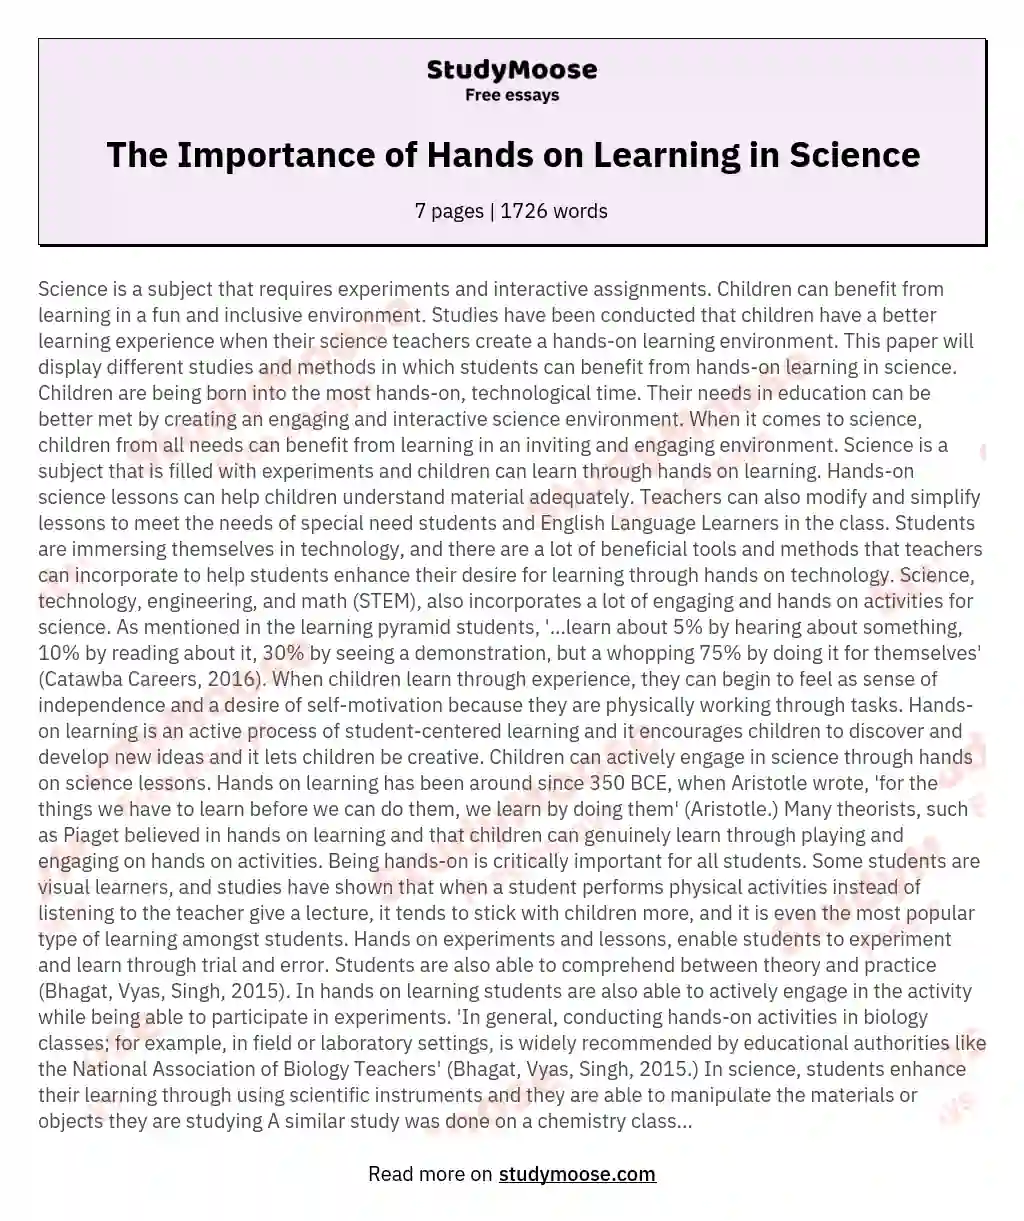 The Importance of Hands on Learning in Science